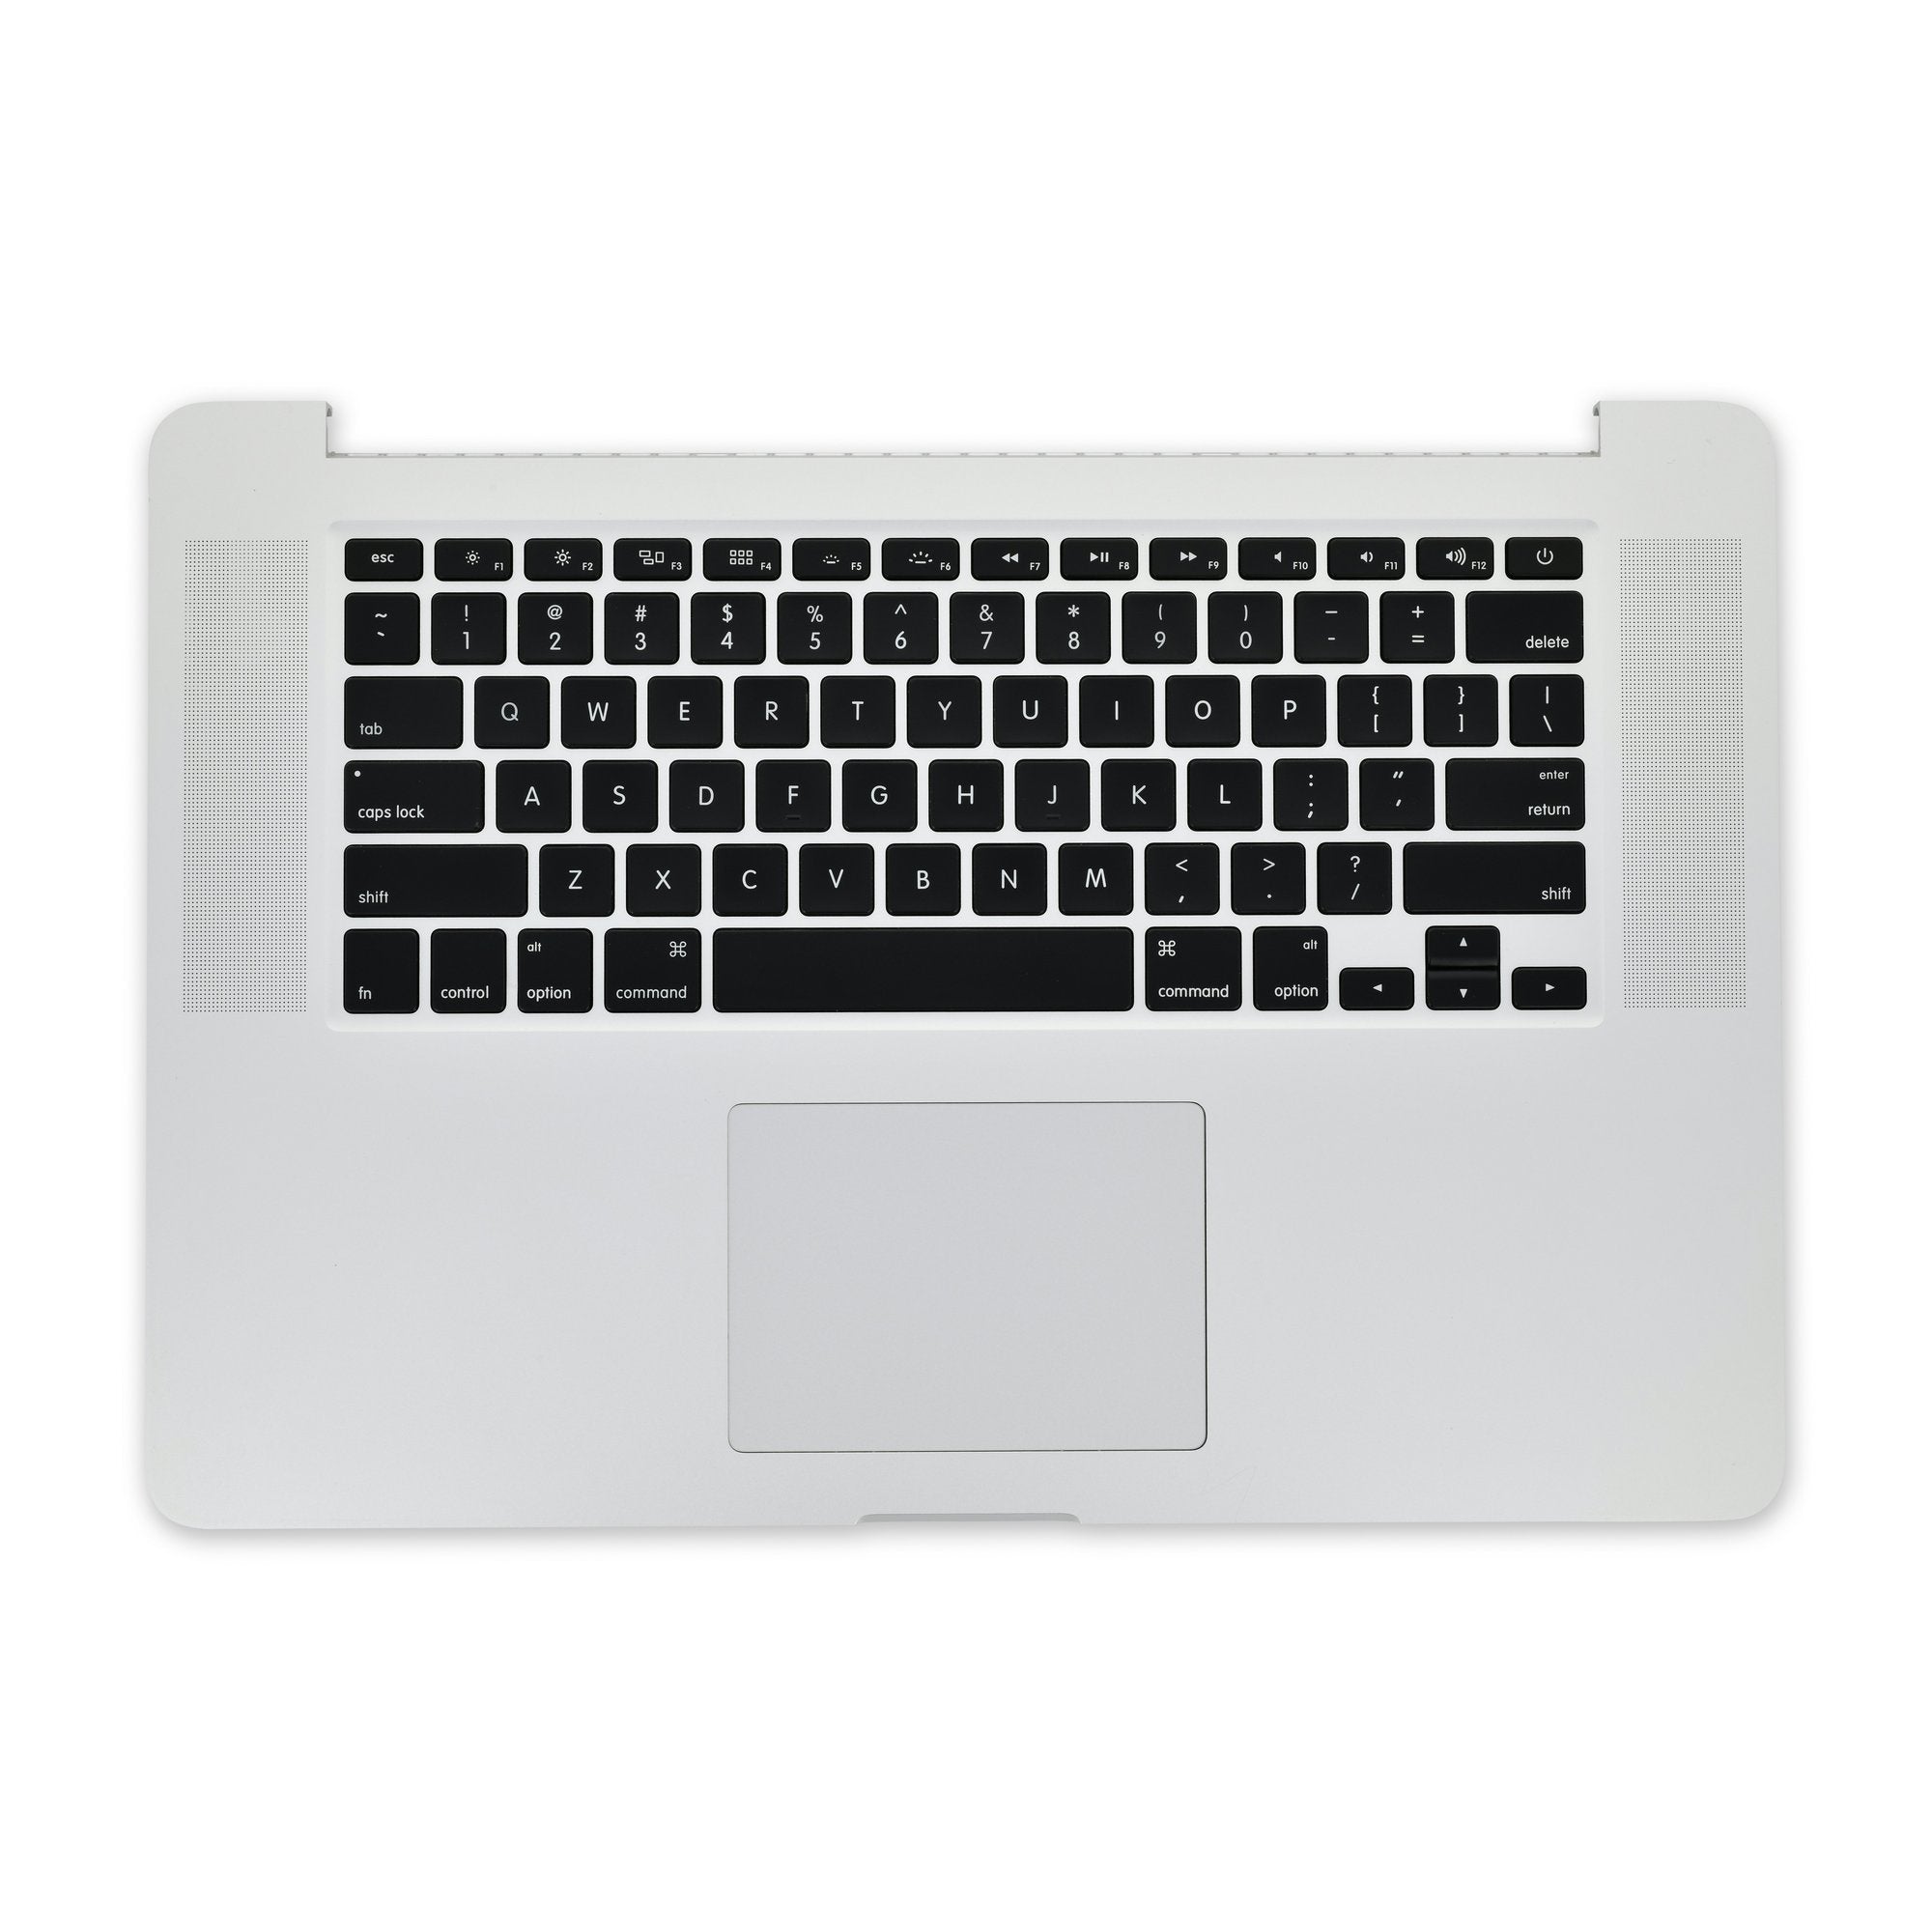 MacBook Pro 15" Retina (Late 2013-Mid 2014) Upper Case Assembly Used, C-Stock With Trackpad, Without Battery